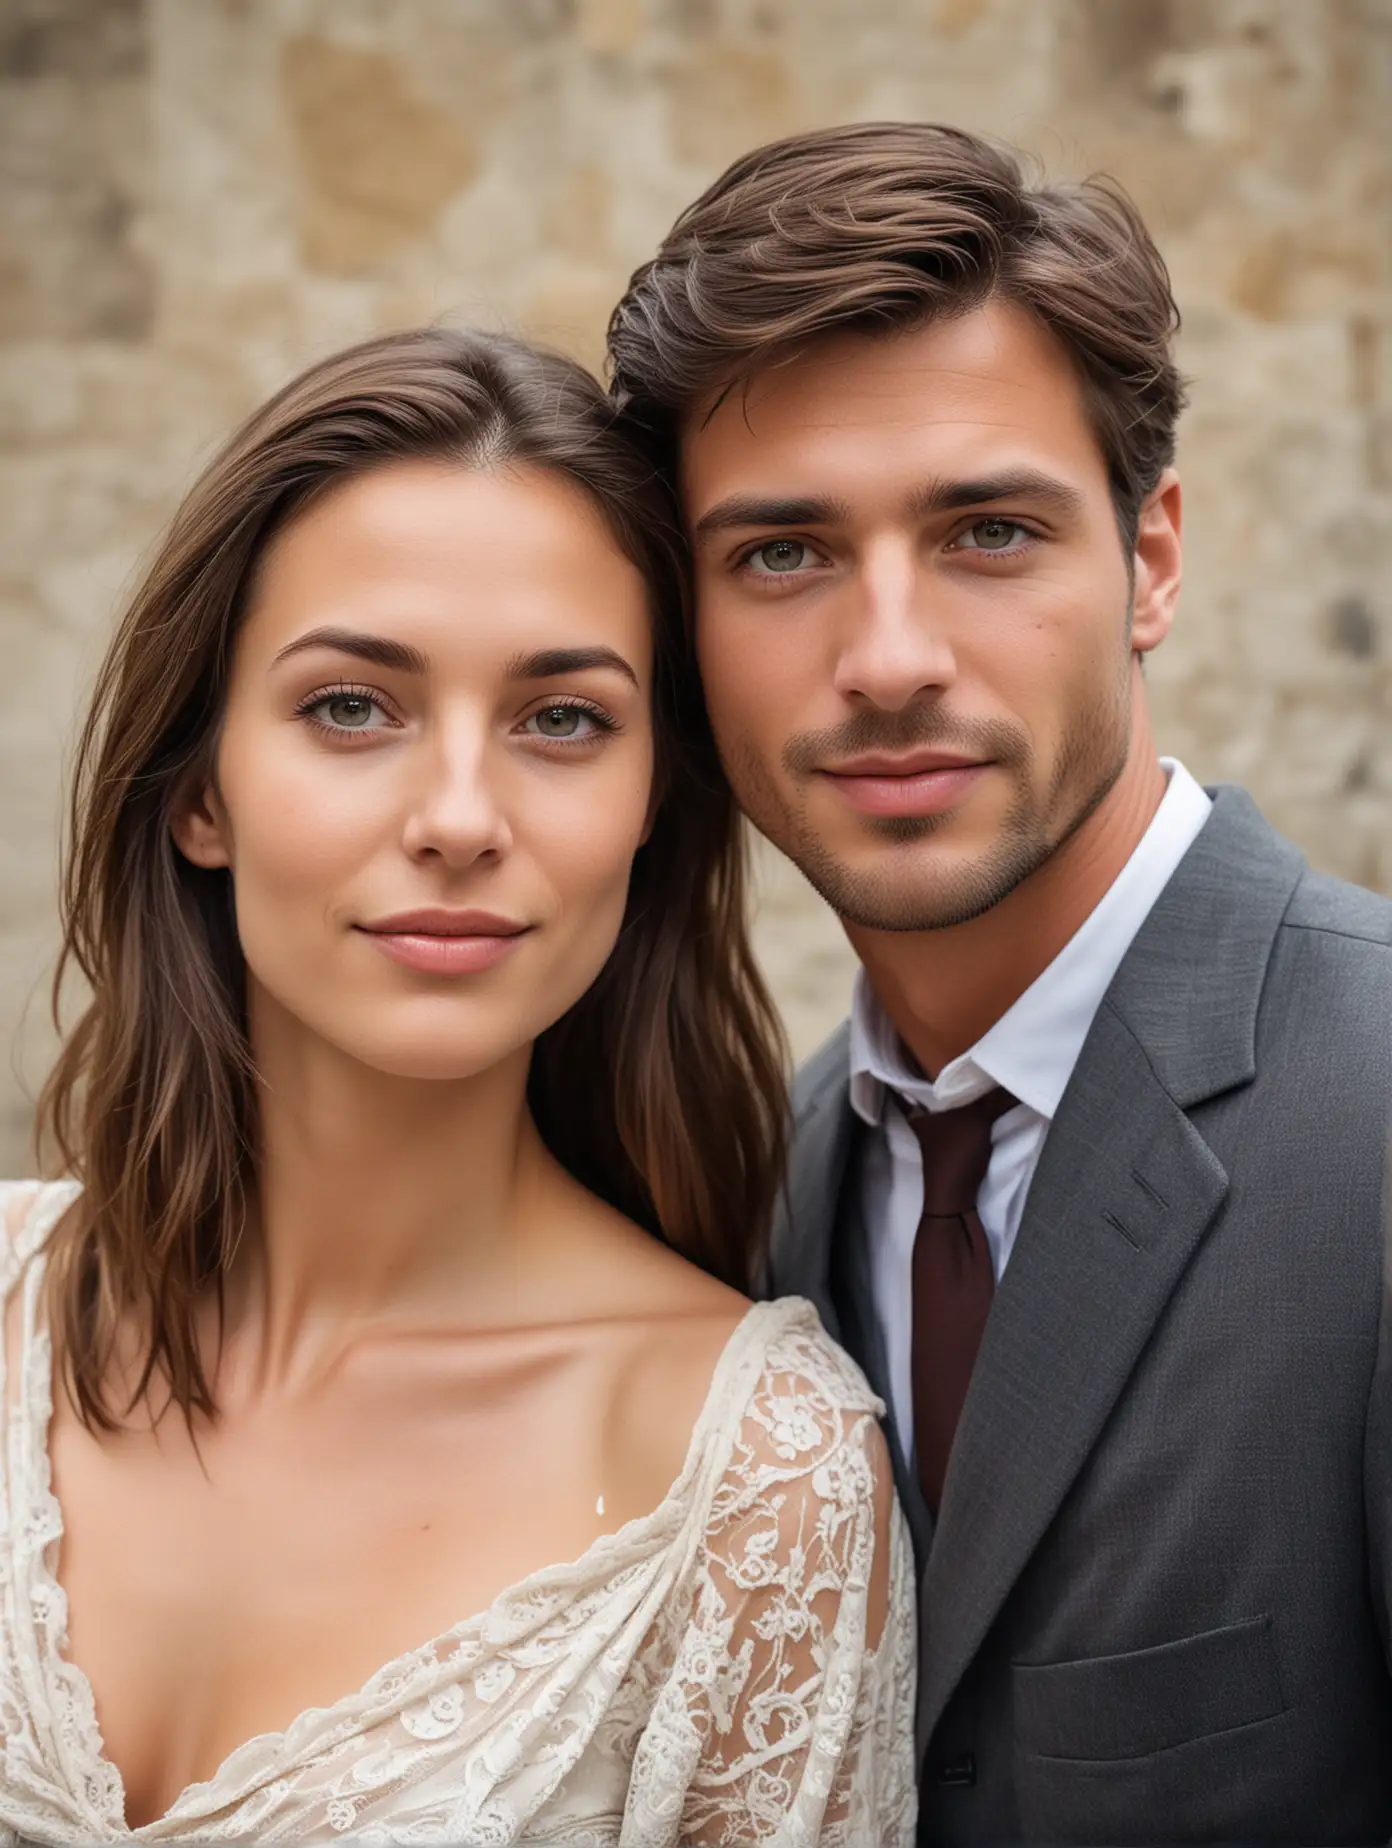 Europeans and Americans, a couple taking a photo, facing the camera, exquisite facial features, full body photo